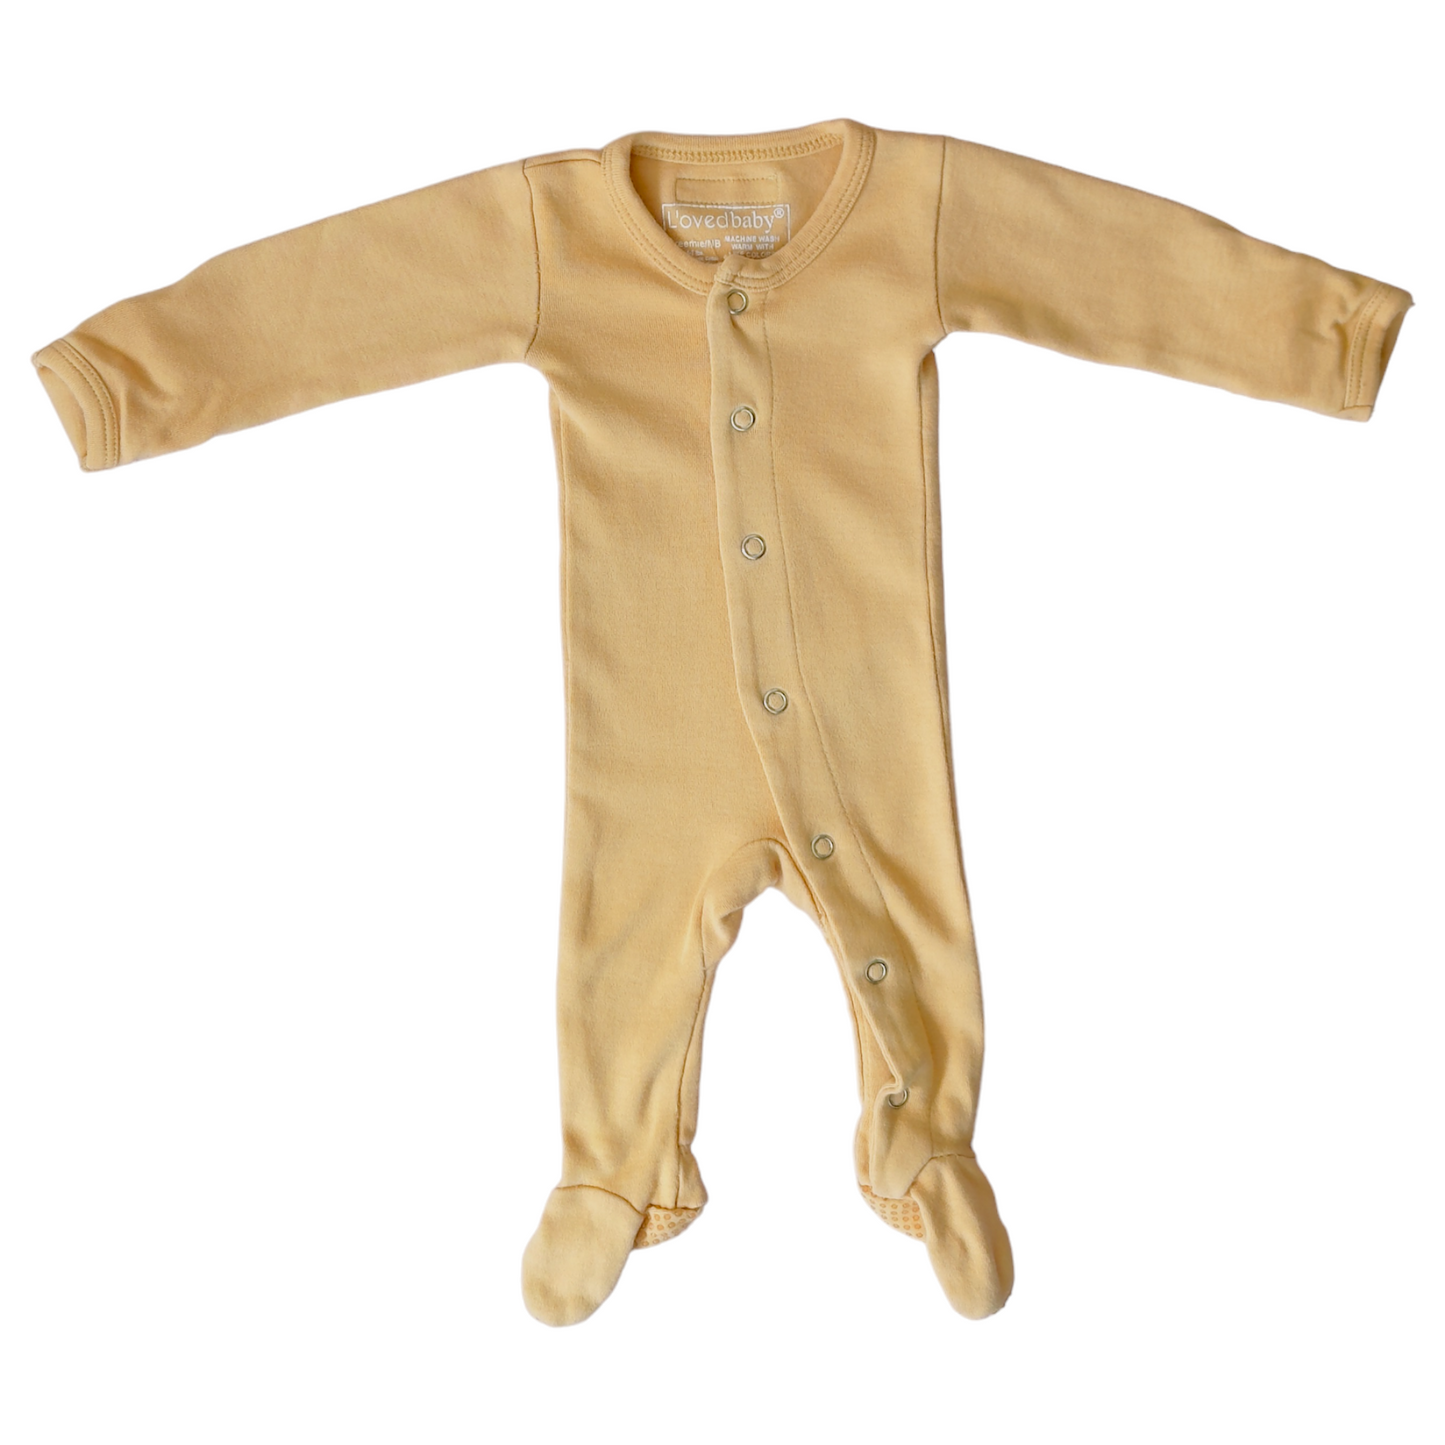 L'oved baby bodysuit | Size: 0-3 months | EUC